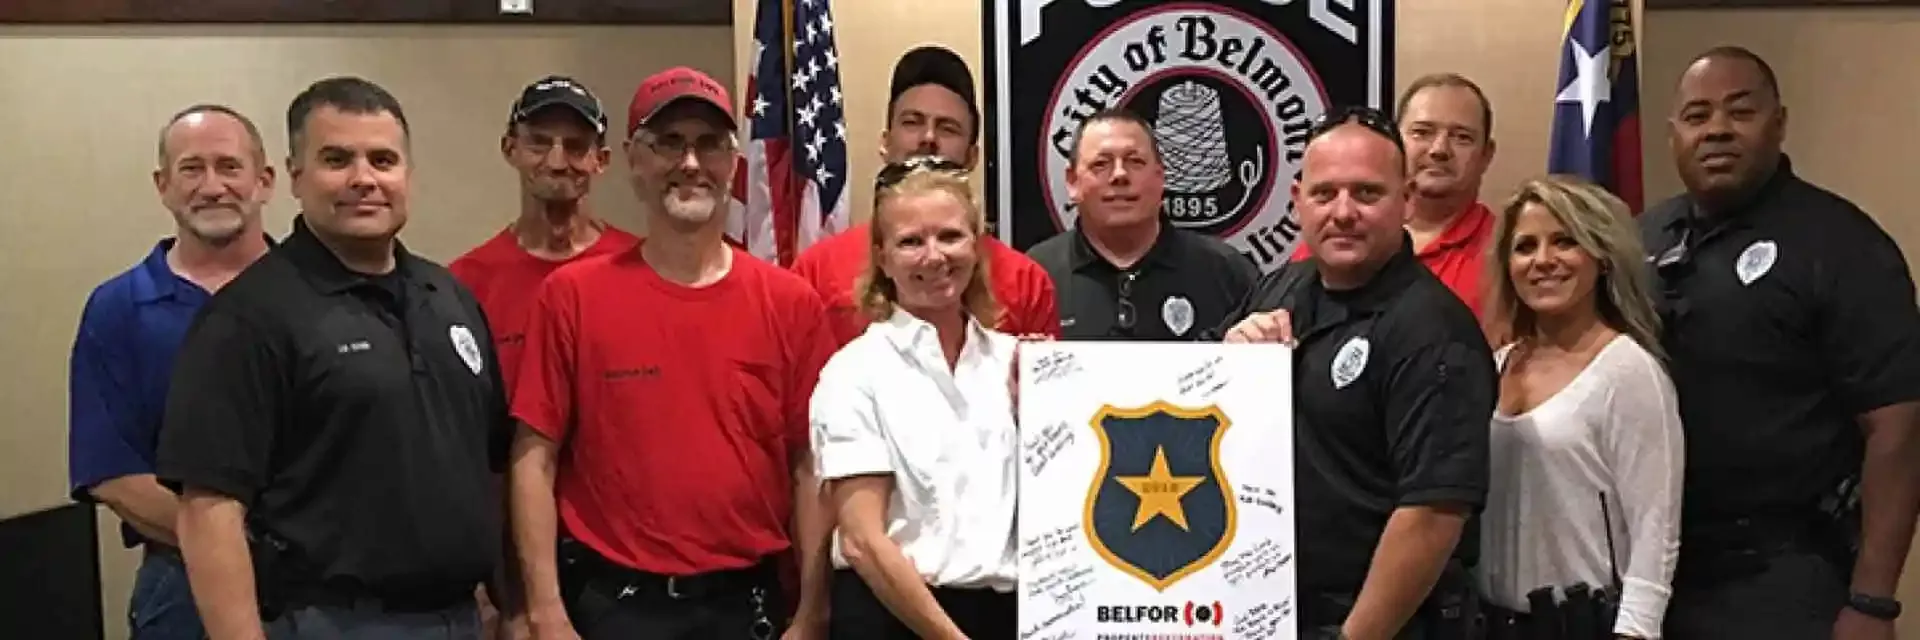 BELFOR Celebrates National Night Out 2018 By Supporting Police